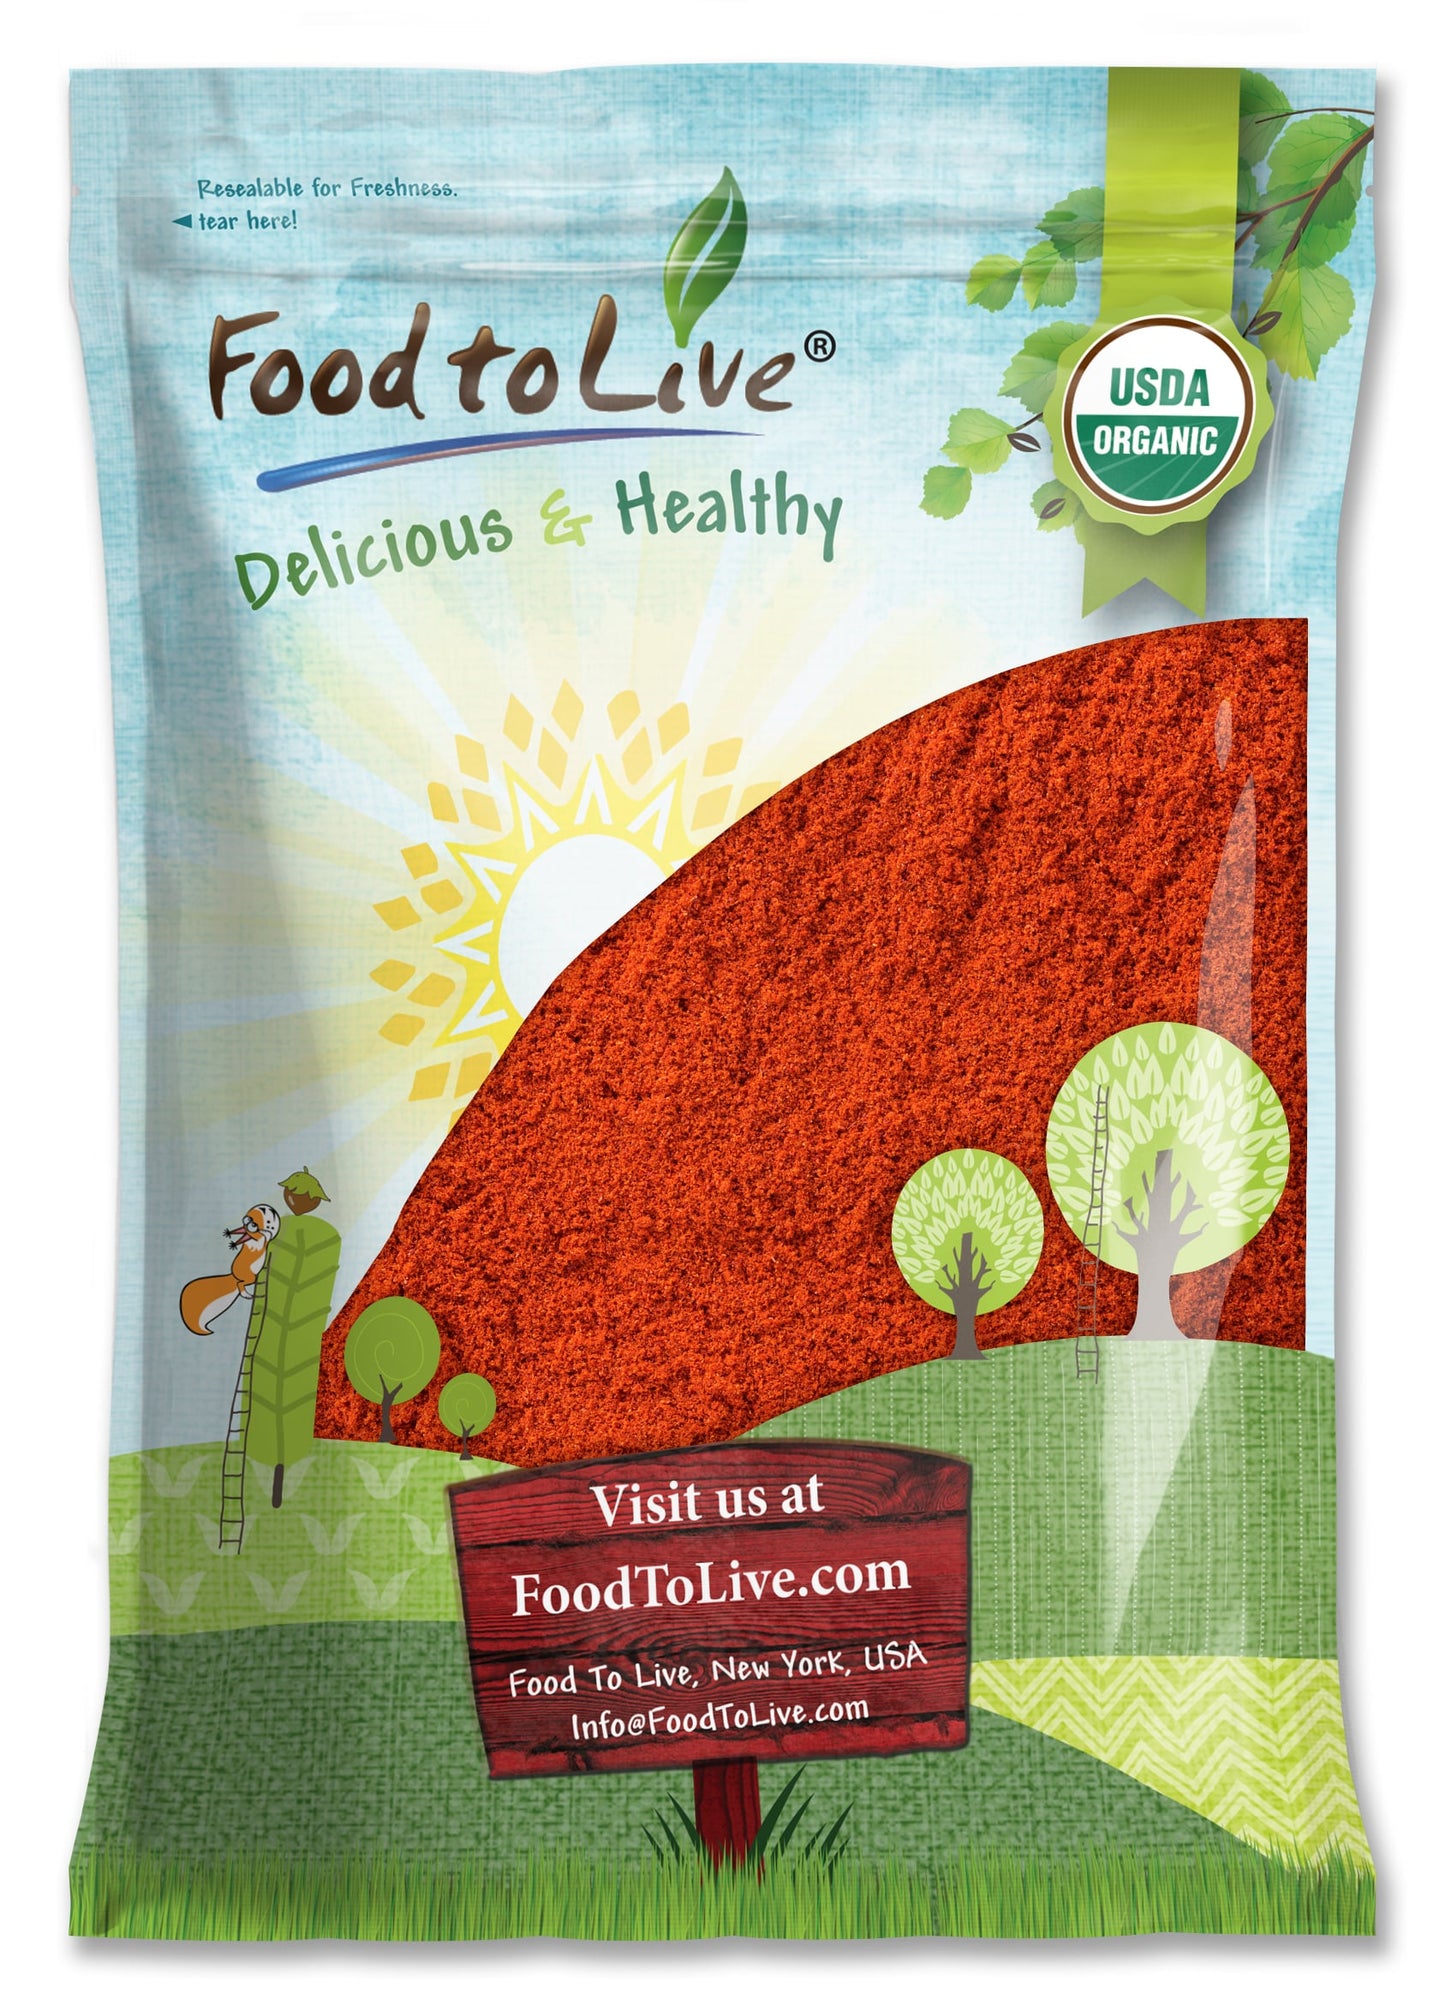 Organic Ground Cayenne Pepper, X Pounds – 100% Pure, Natural and Non-GMO Powder - Fiery Spice with Bold Flavor - Perfect Seasoning for Adding Heat to Your Dishes, 40,000 SHU